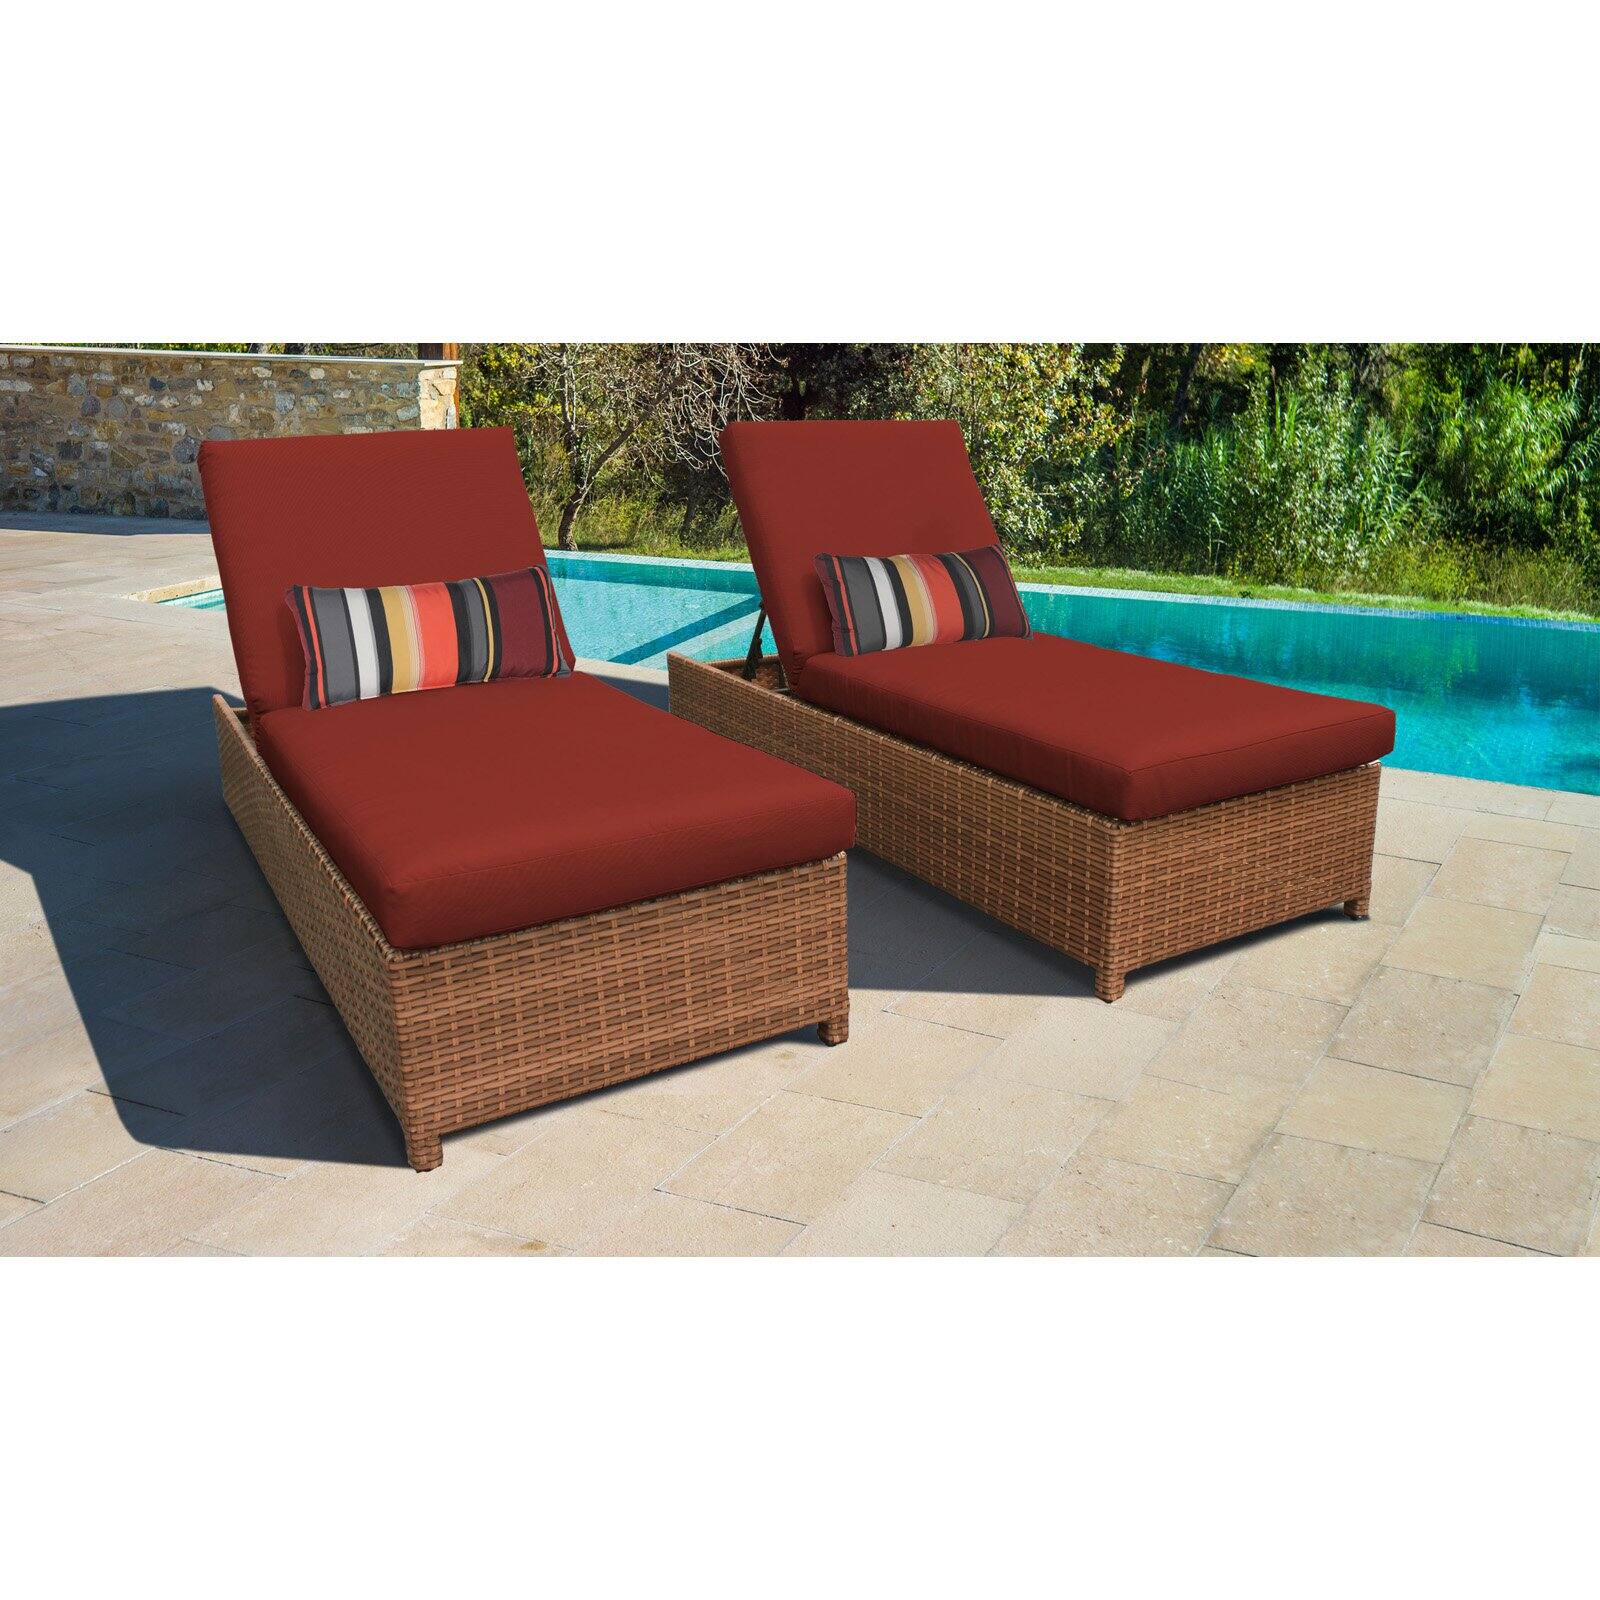 TK Classics Laguna Wheeled Wicker Outdoor Chaise Lounge Chair - Set of 2 - image 3 of 11